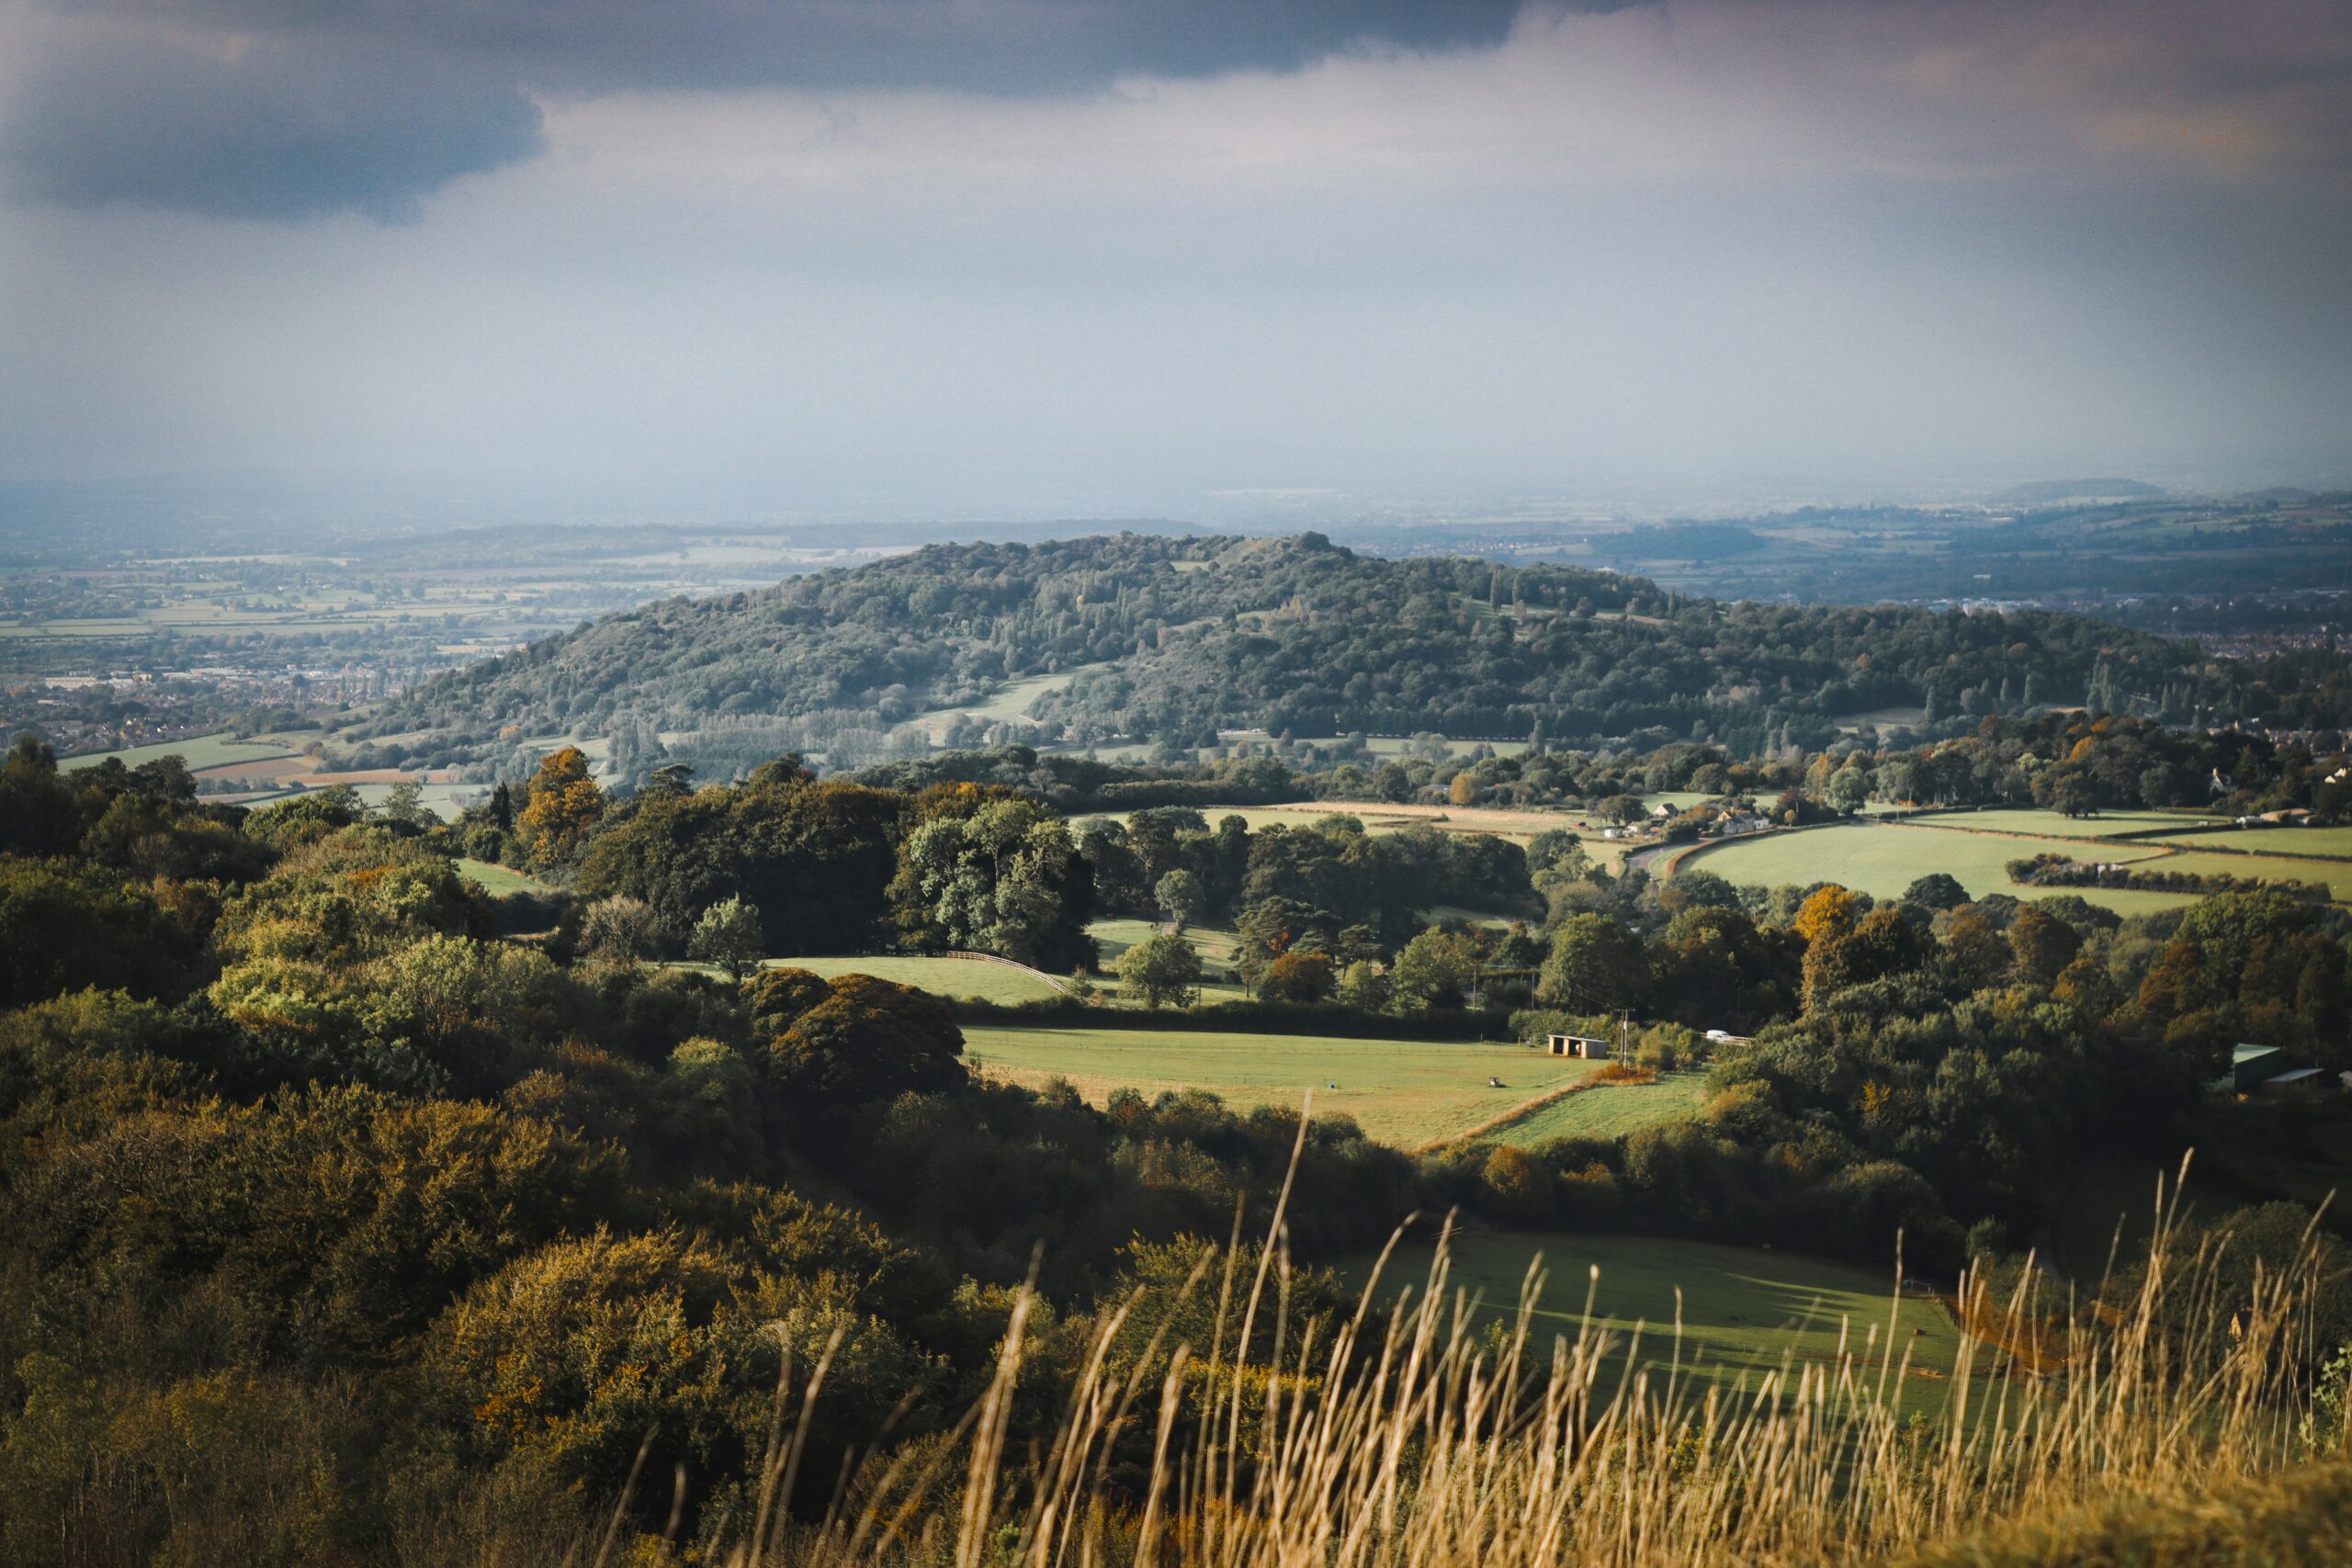 Gloucestershire is a southern part of the English countryside and one of the places that "The Gentlemen" series was filmed in.
pictured: the rolling hills and valleys of Gloucestershire